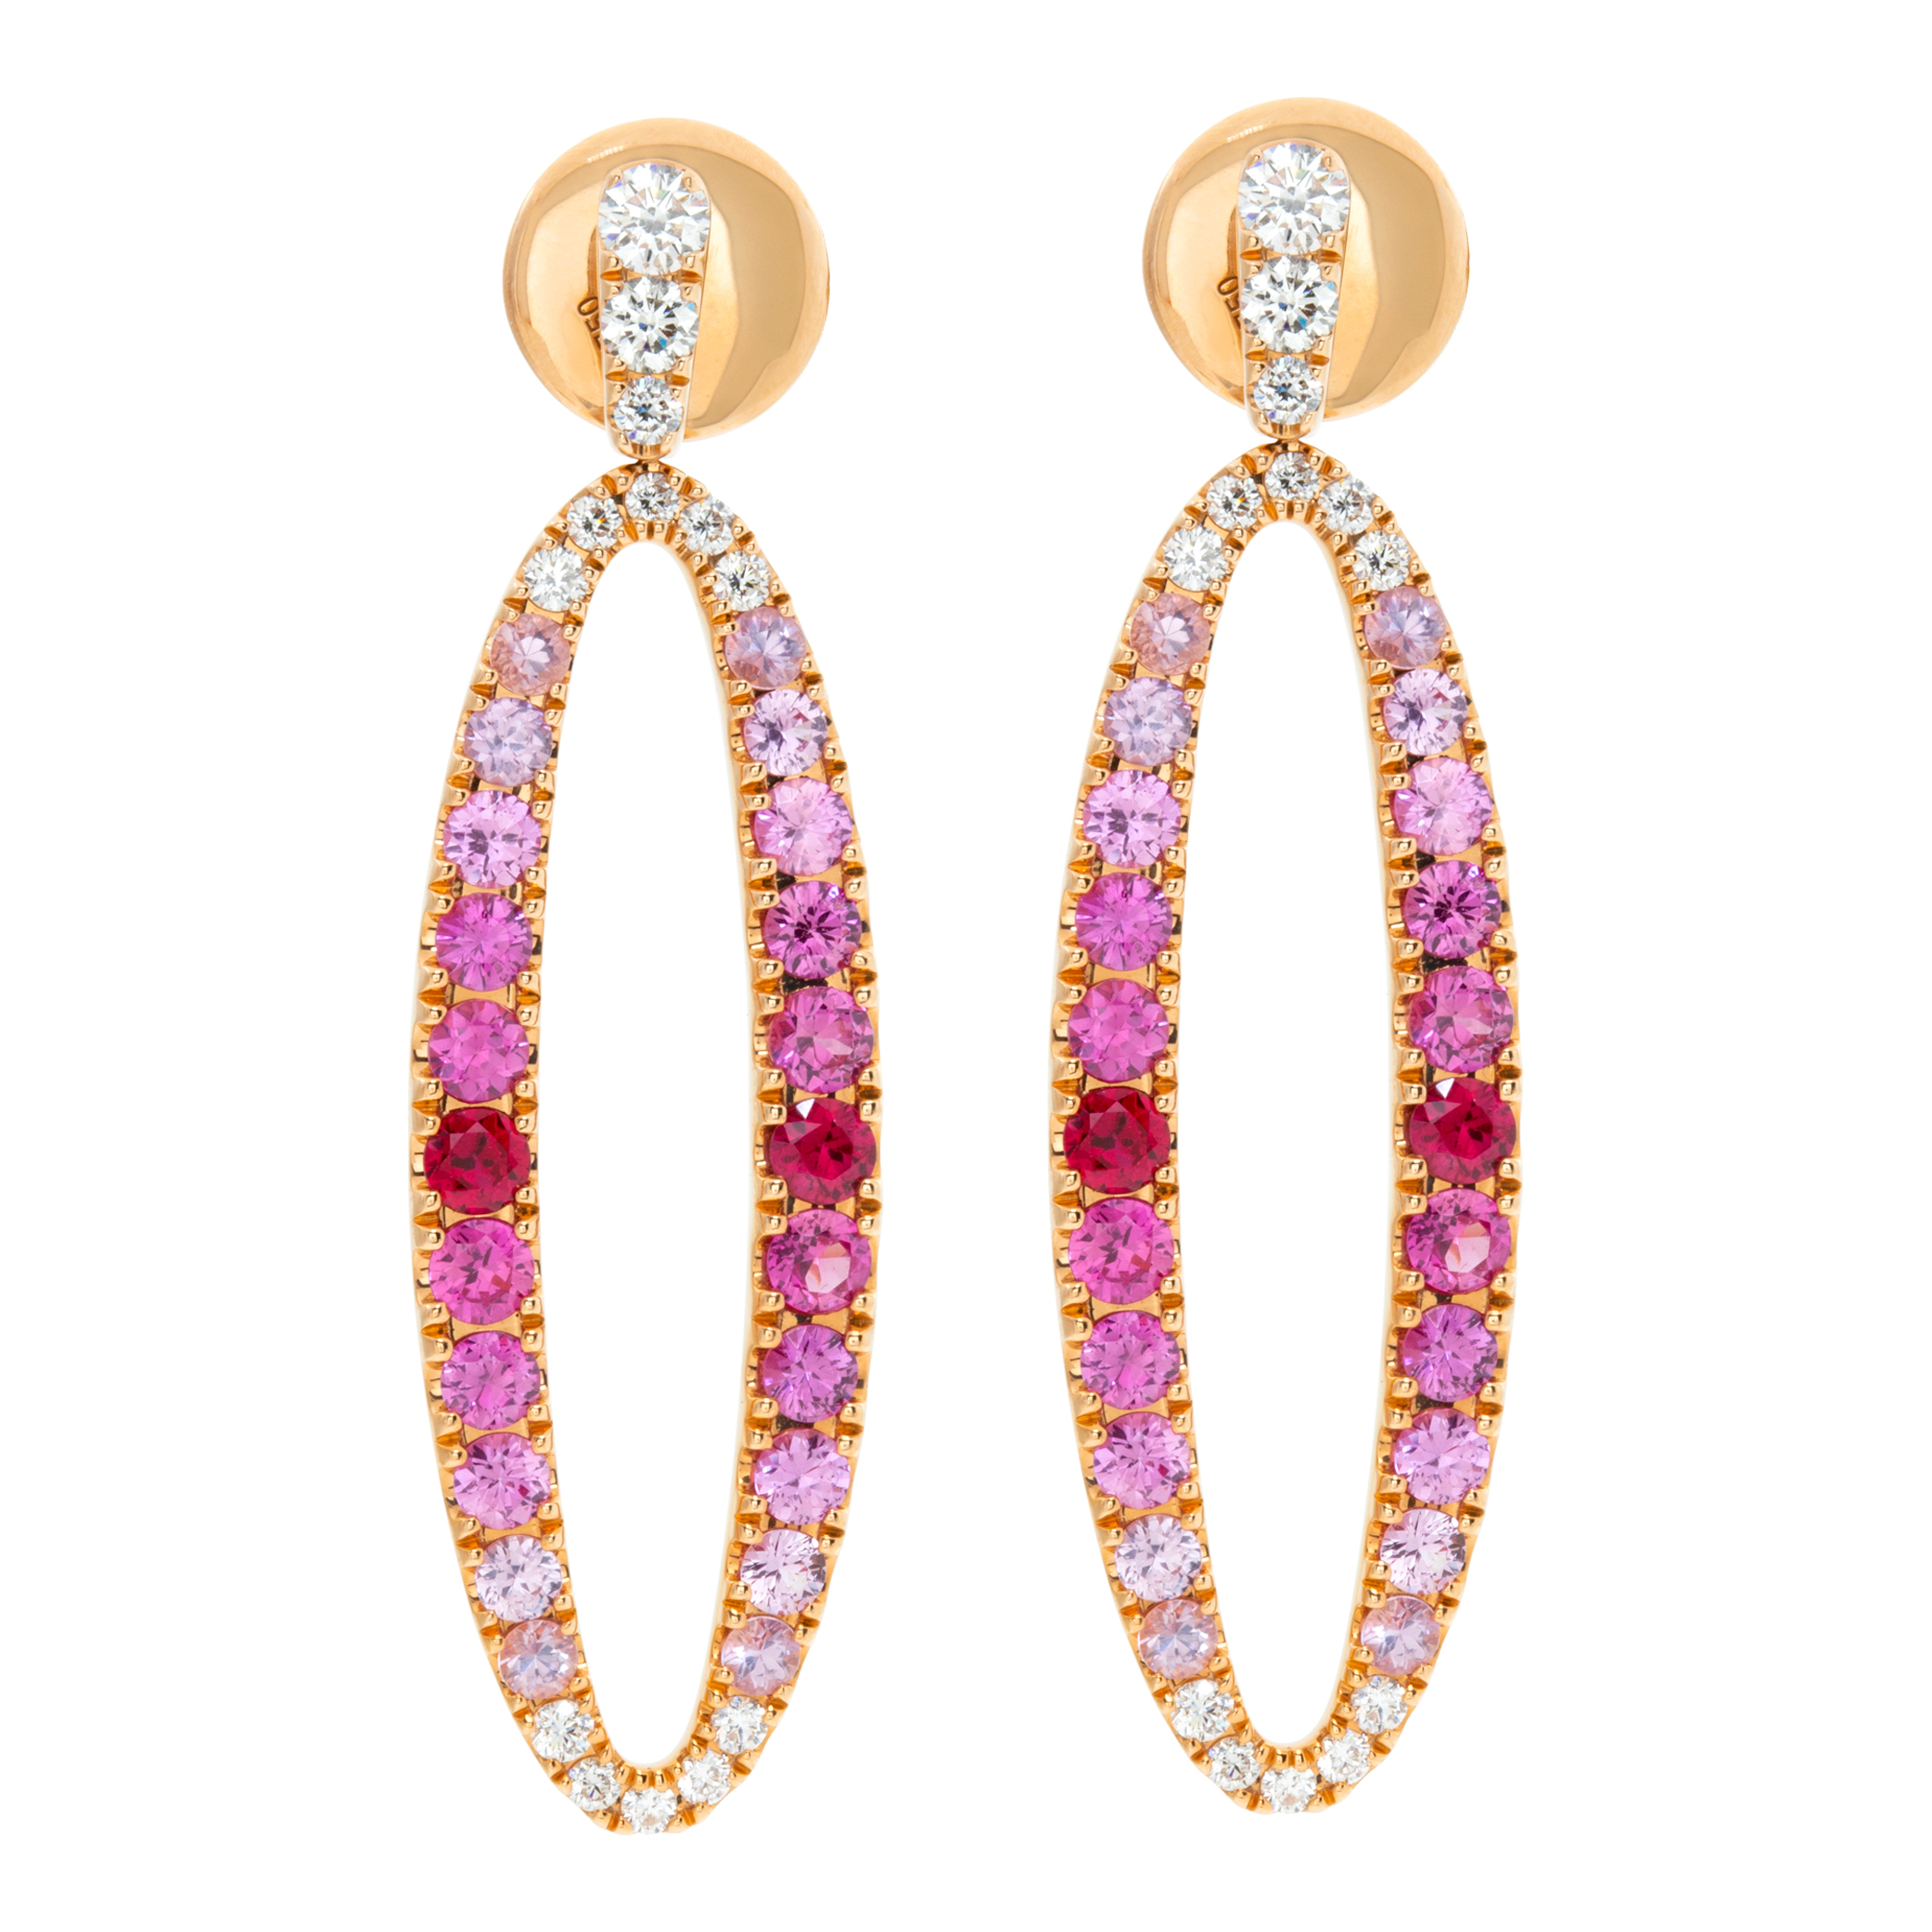 Diamond, Sapphire and Ruby earrings in 18k rose gold (Stones)